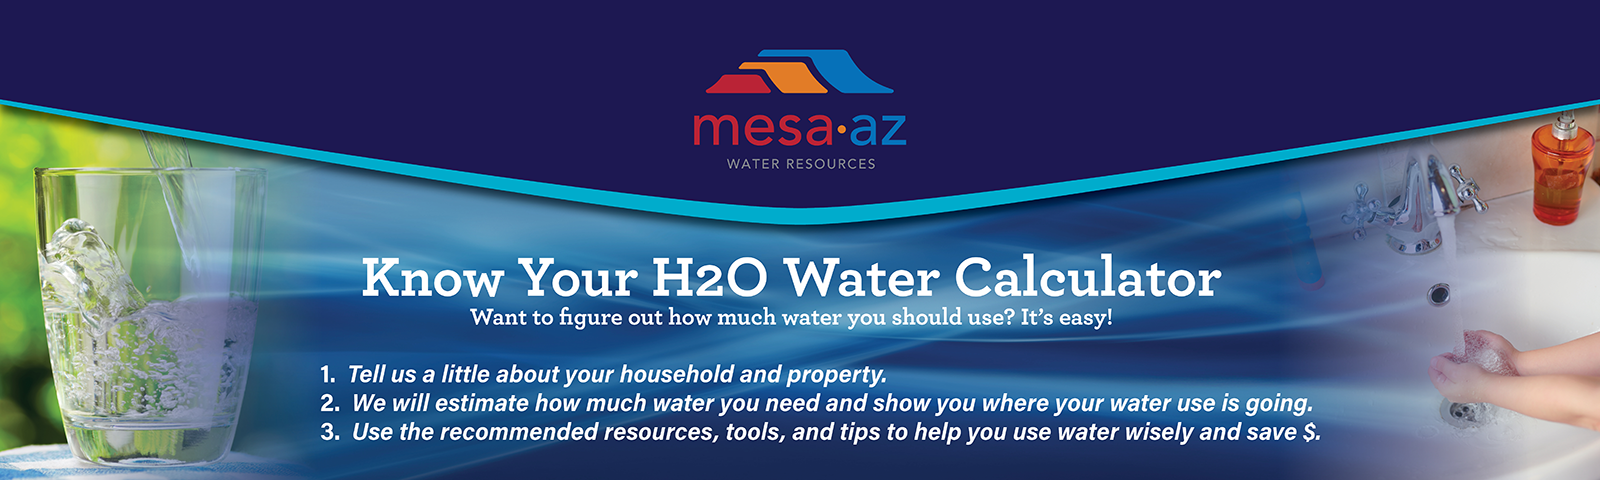 know your h2o